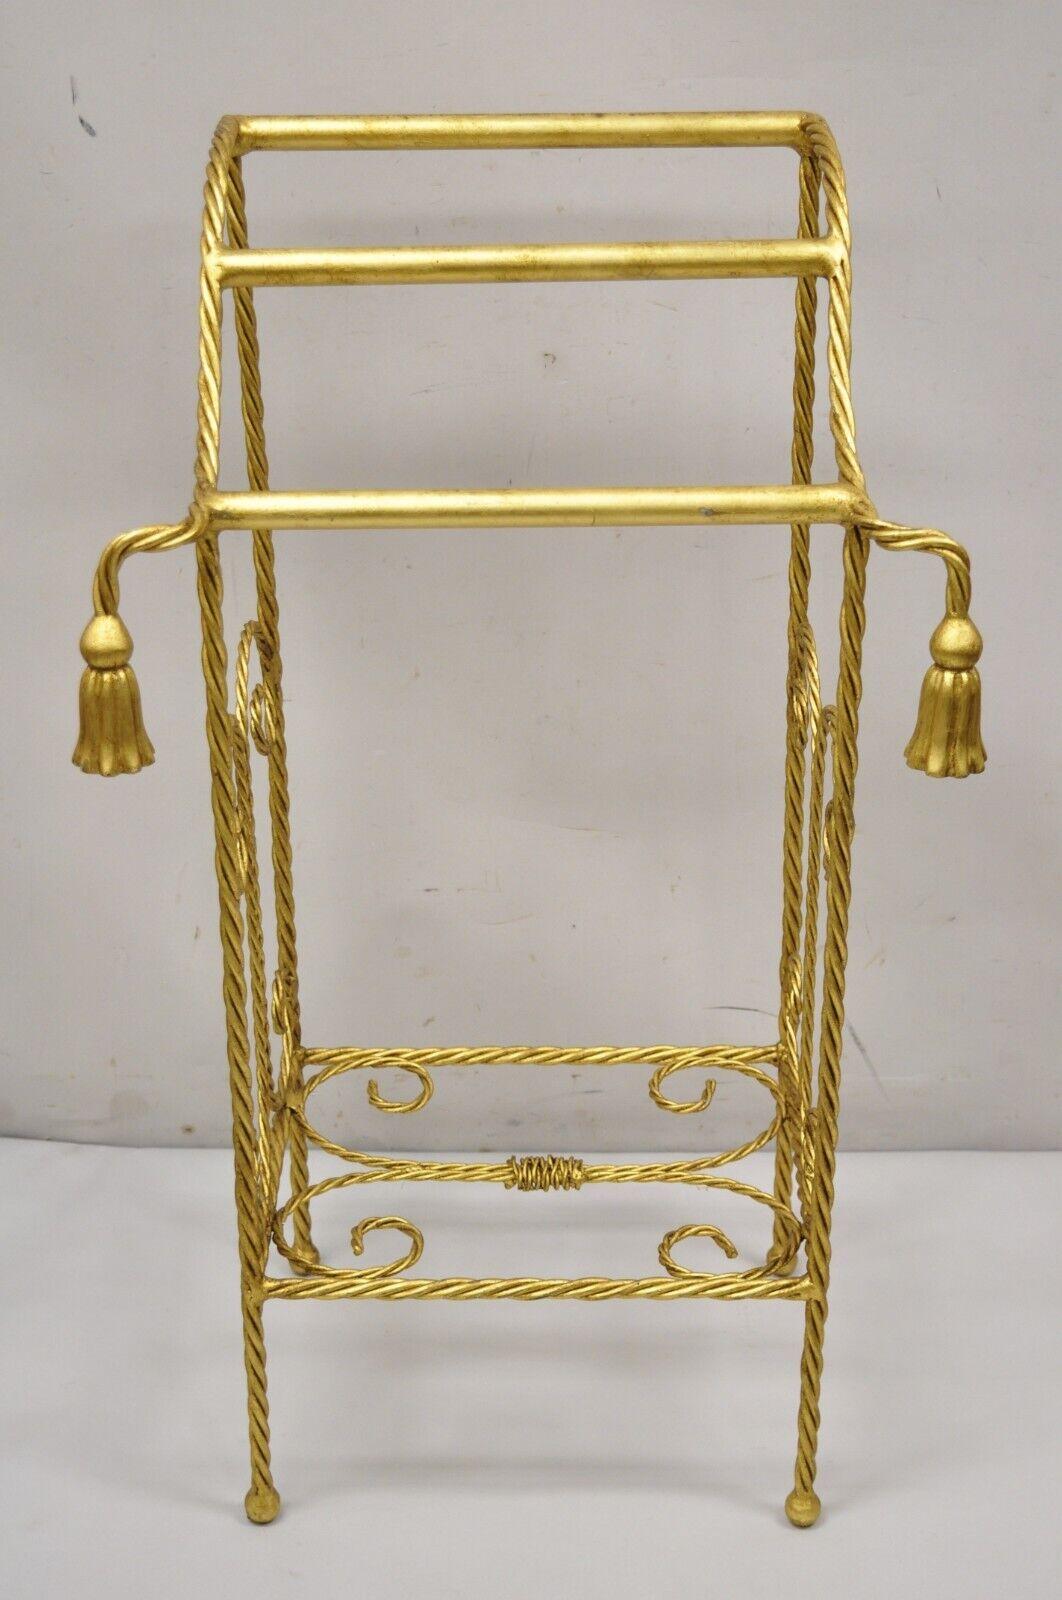 Vintage Italian Hollywood Regency Gold Iron Metal Rope Tassel Form Bathroom Towel Rack Stand. Item features tassel form accents, iron metal frame, lower shelf, gold leaf gilt finish, quality Italian craftsmanship, great style and form. Circa Mid